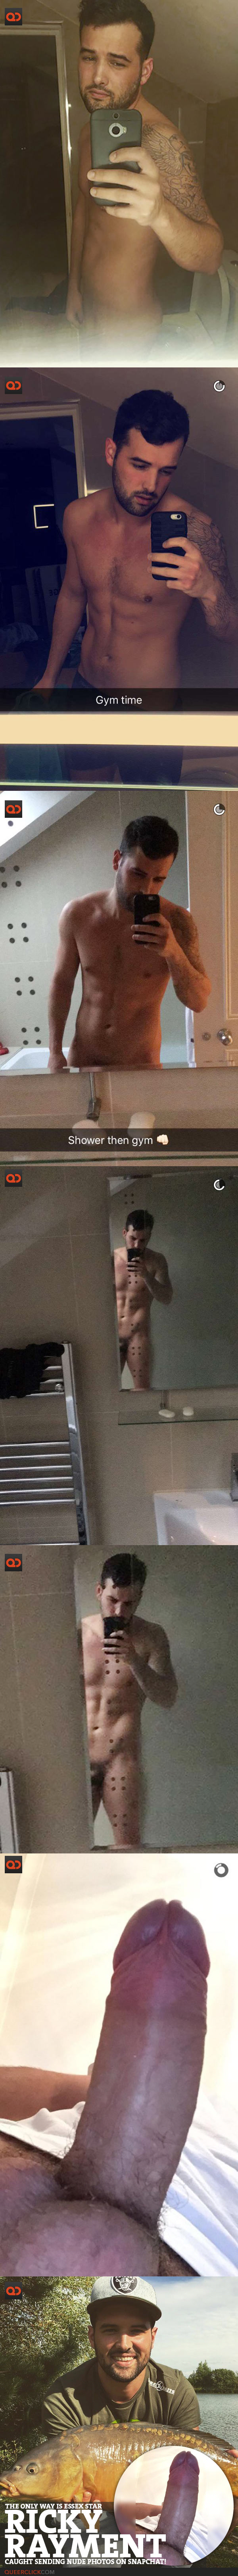 qc-ricky_rayment_towie_star_caught_naked_on_snapchat-collage03